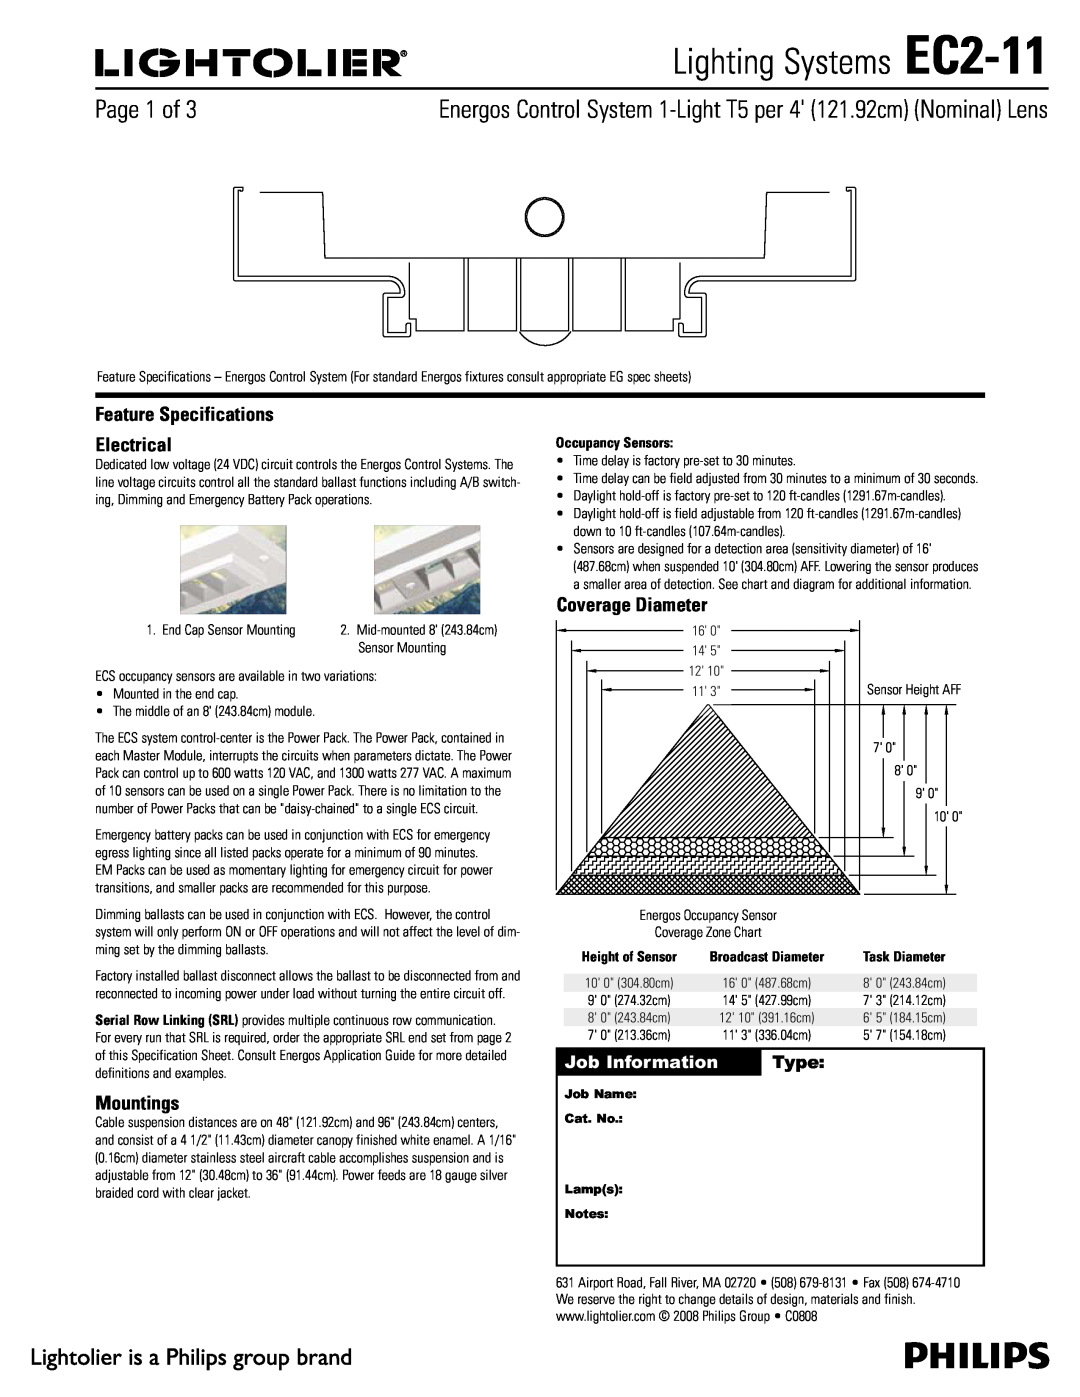 Lightolier specifications Lighting Systems EC2-11, Feature Specifications Electrical, Mountings, Coverage Diameter 